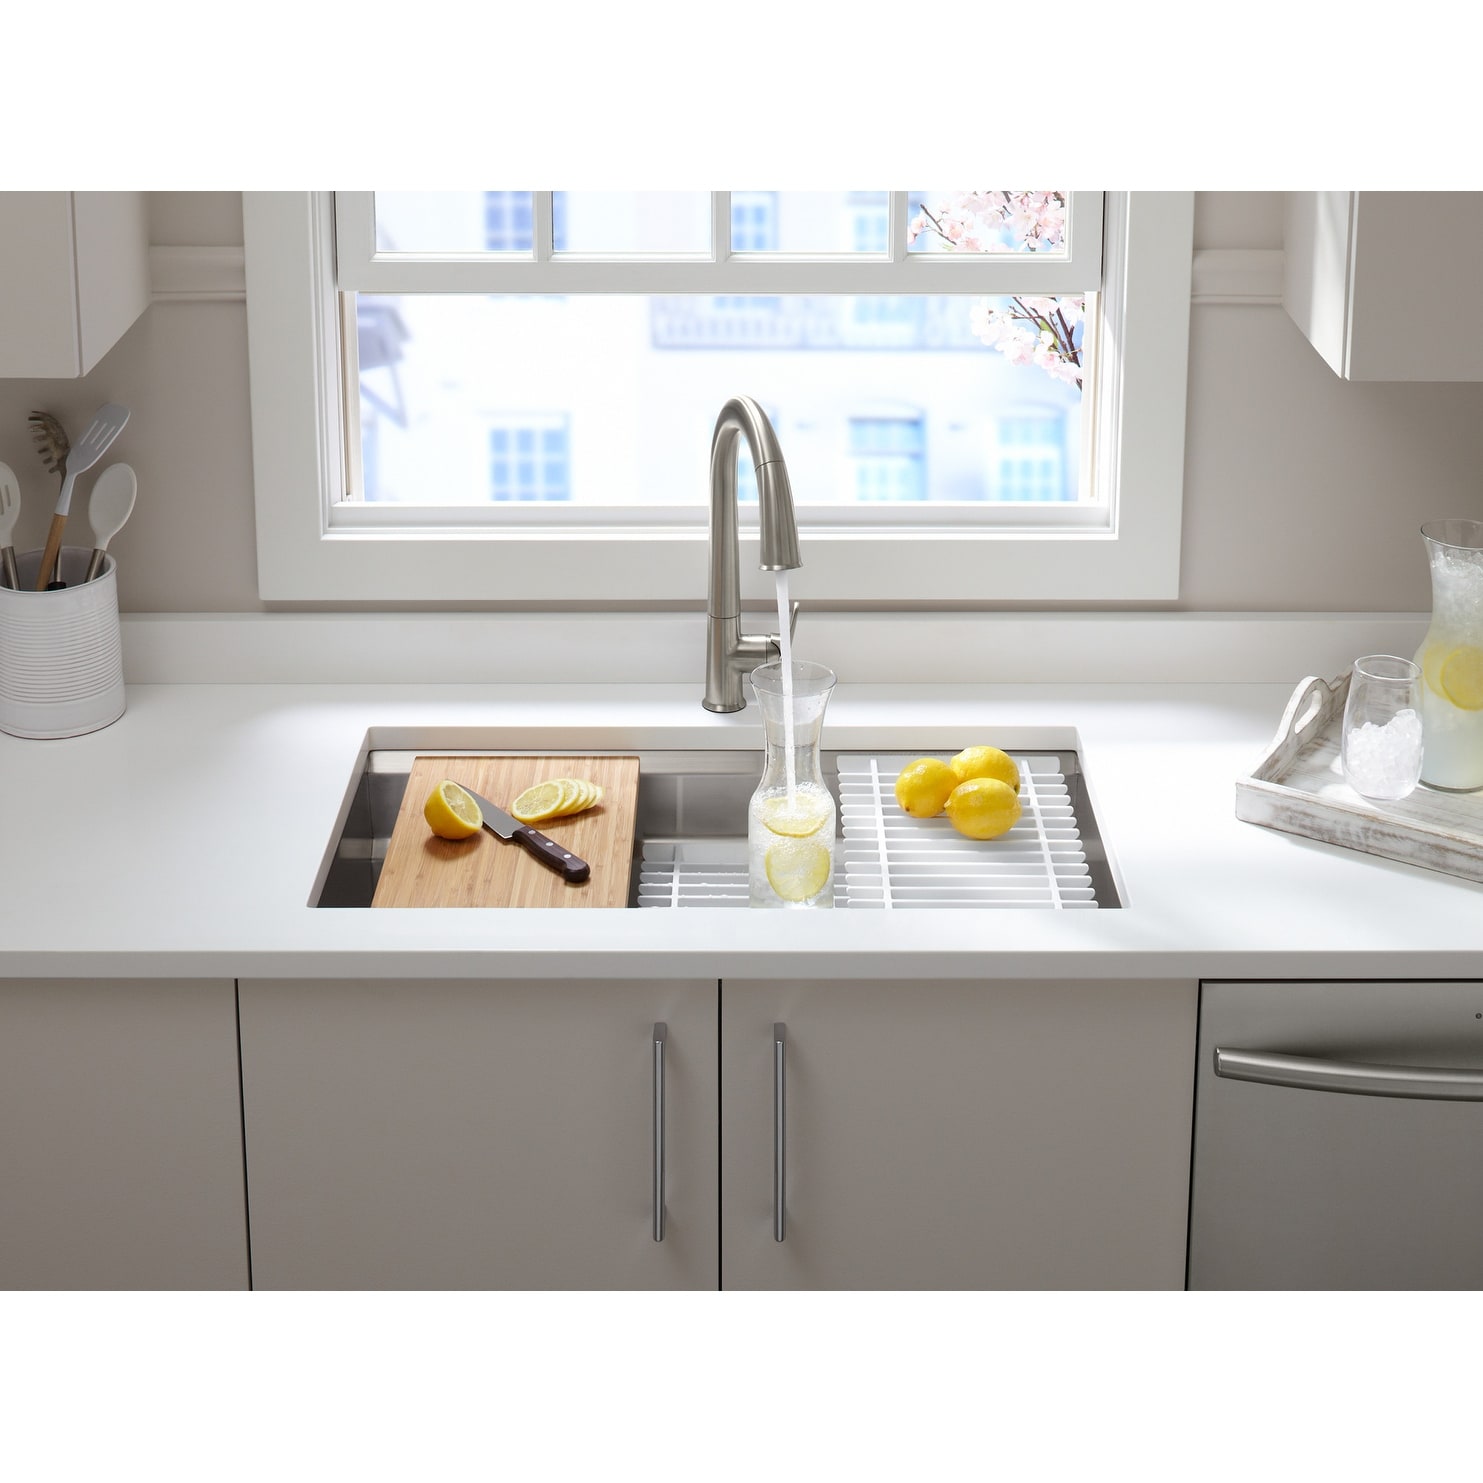 Kohler K 5540 Prolific 33 Single Basin Undermount Kitchen Sink With Silent Shield And Accessories Stainless Steel